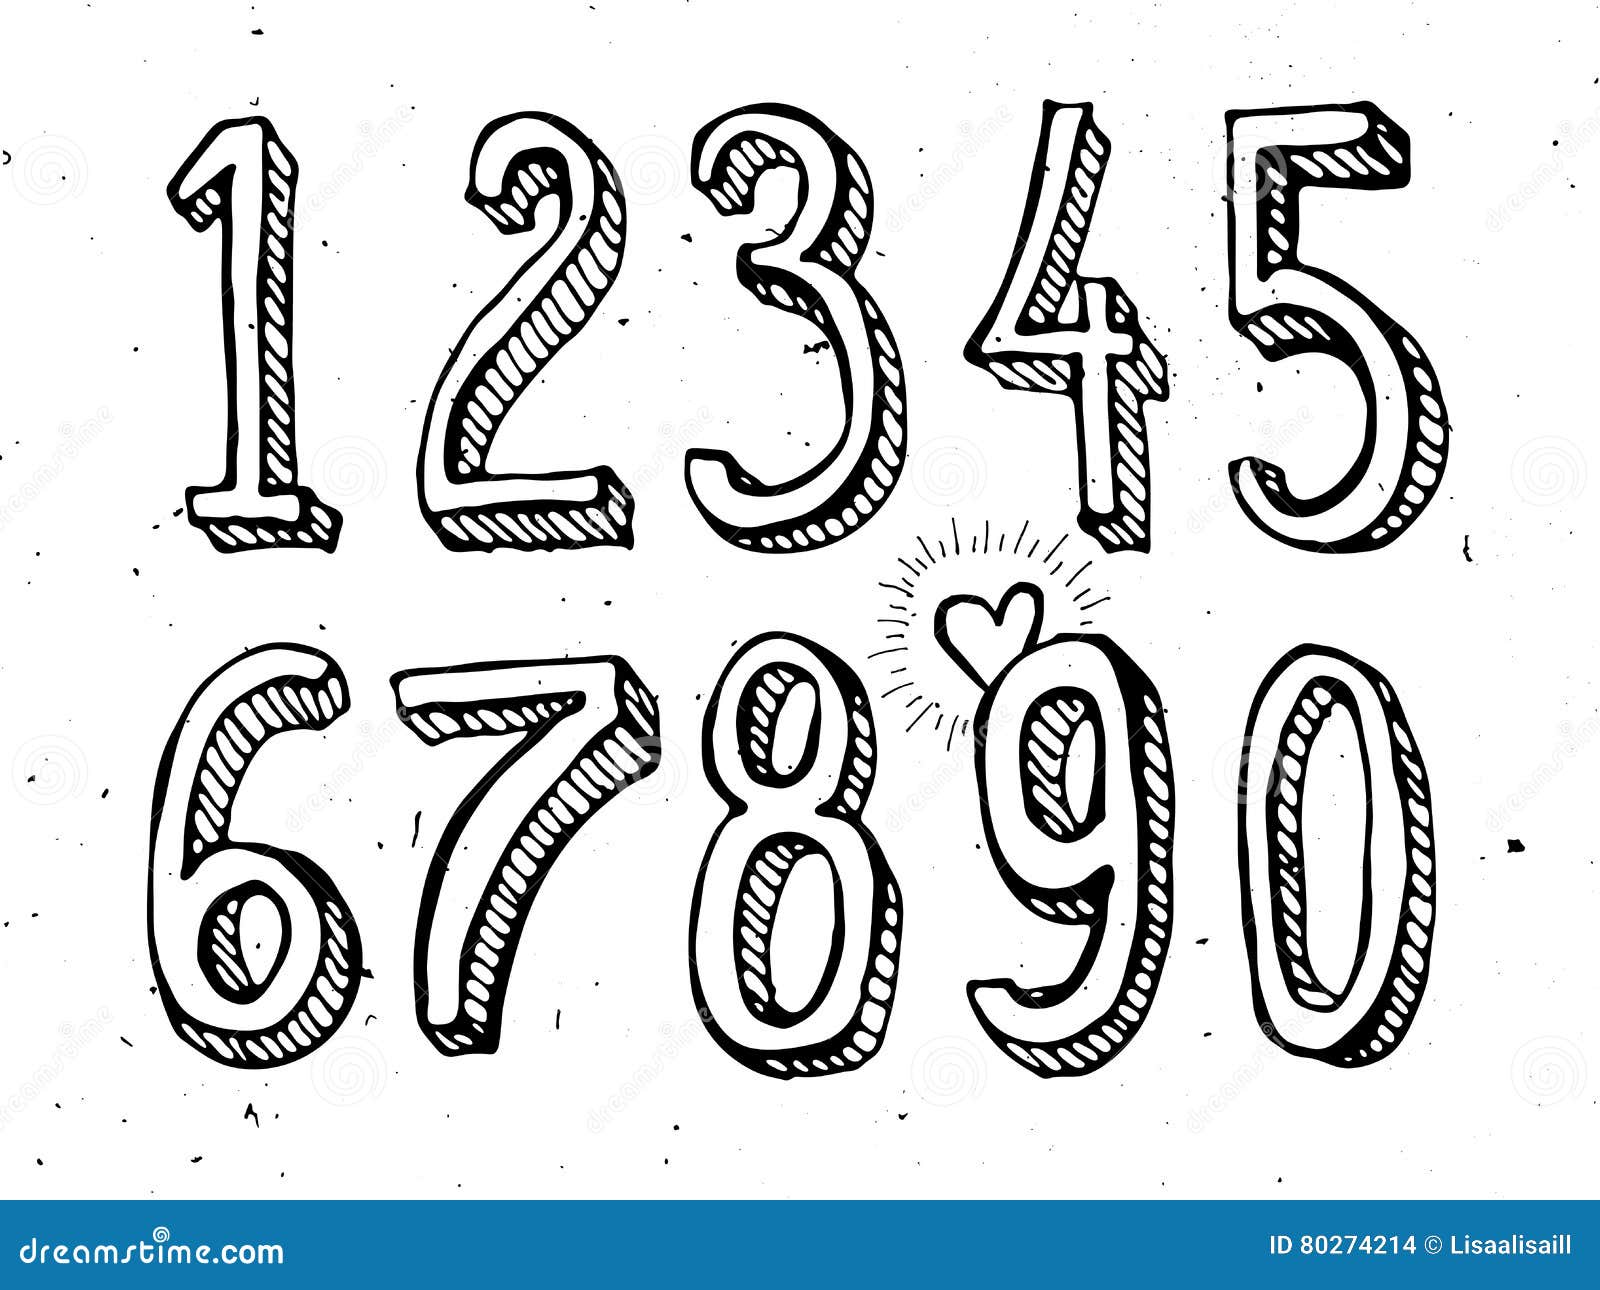 Numbers Sketch Stock Illustrations 7 055 Numbers Sketch Stock Illustrations Vectors Clipart Dreamstime